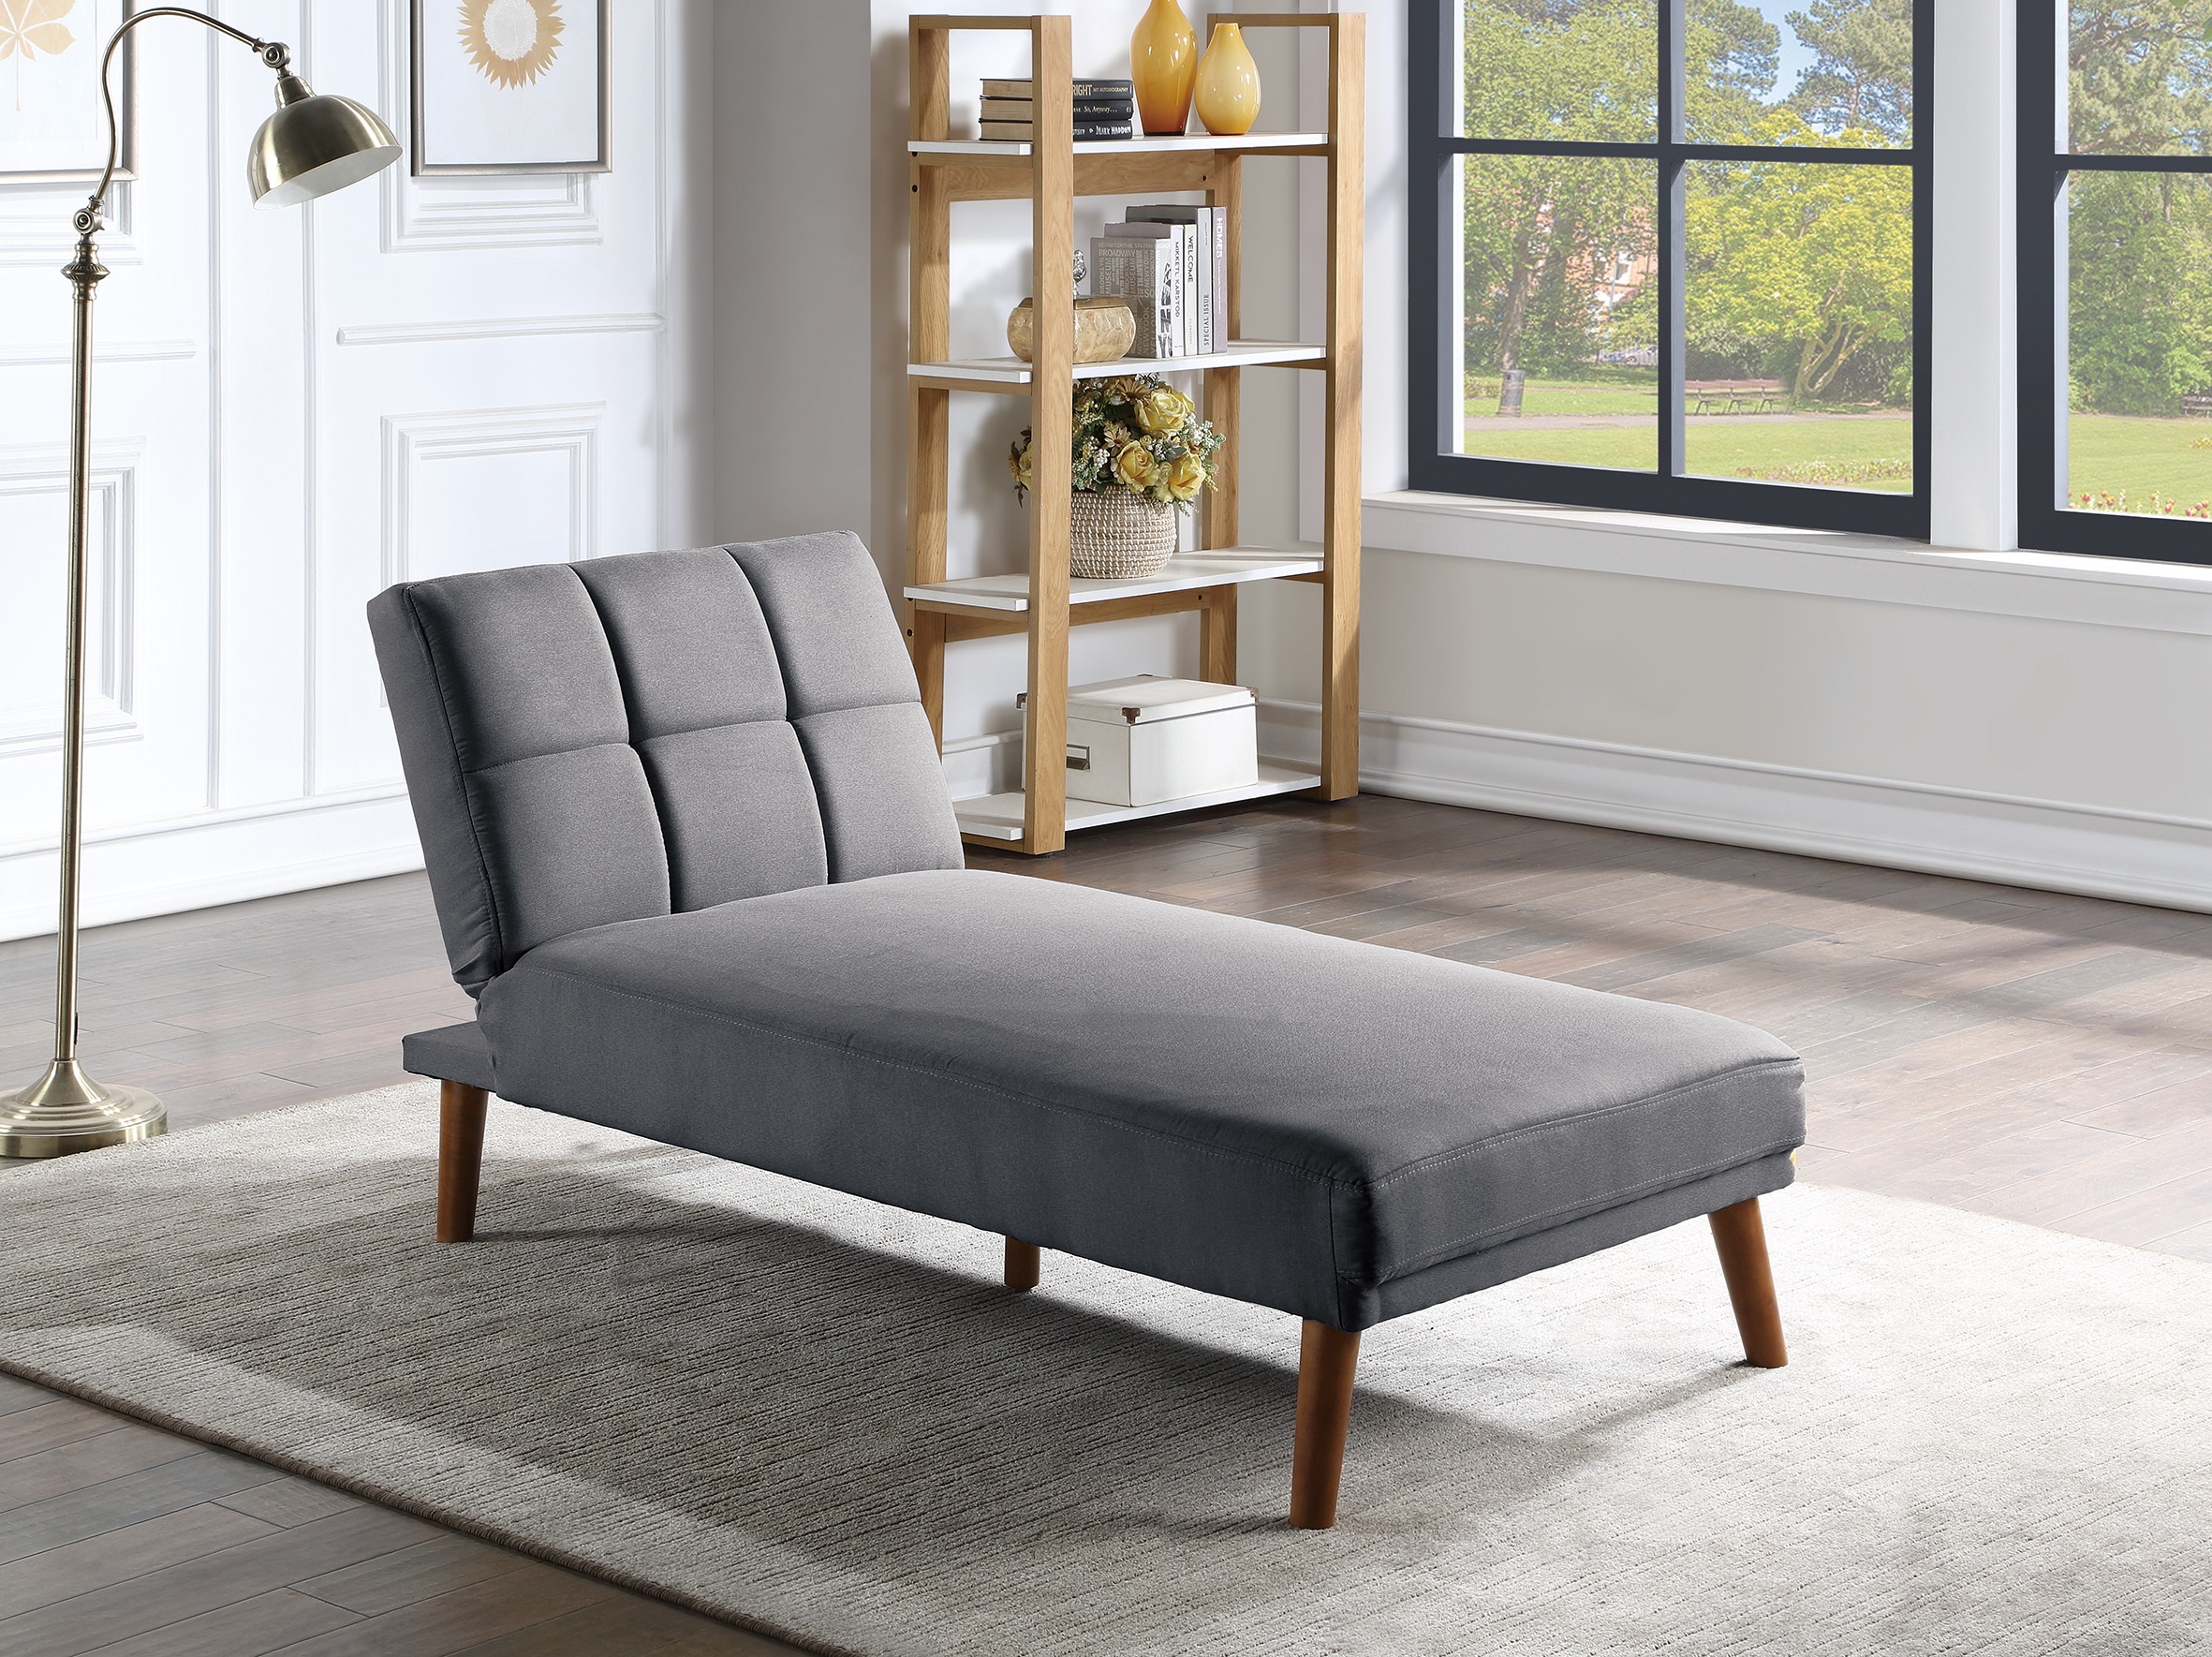 Blue Grey Polyfiber Adjustable Chaise Bed Living Room Solid wood Legs Tufted Comfort Couch-Boyel Living